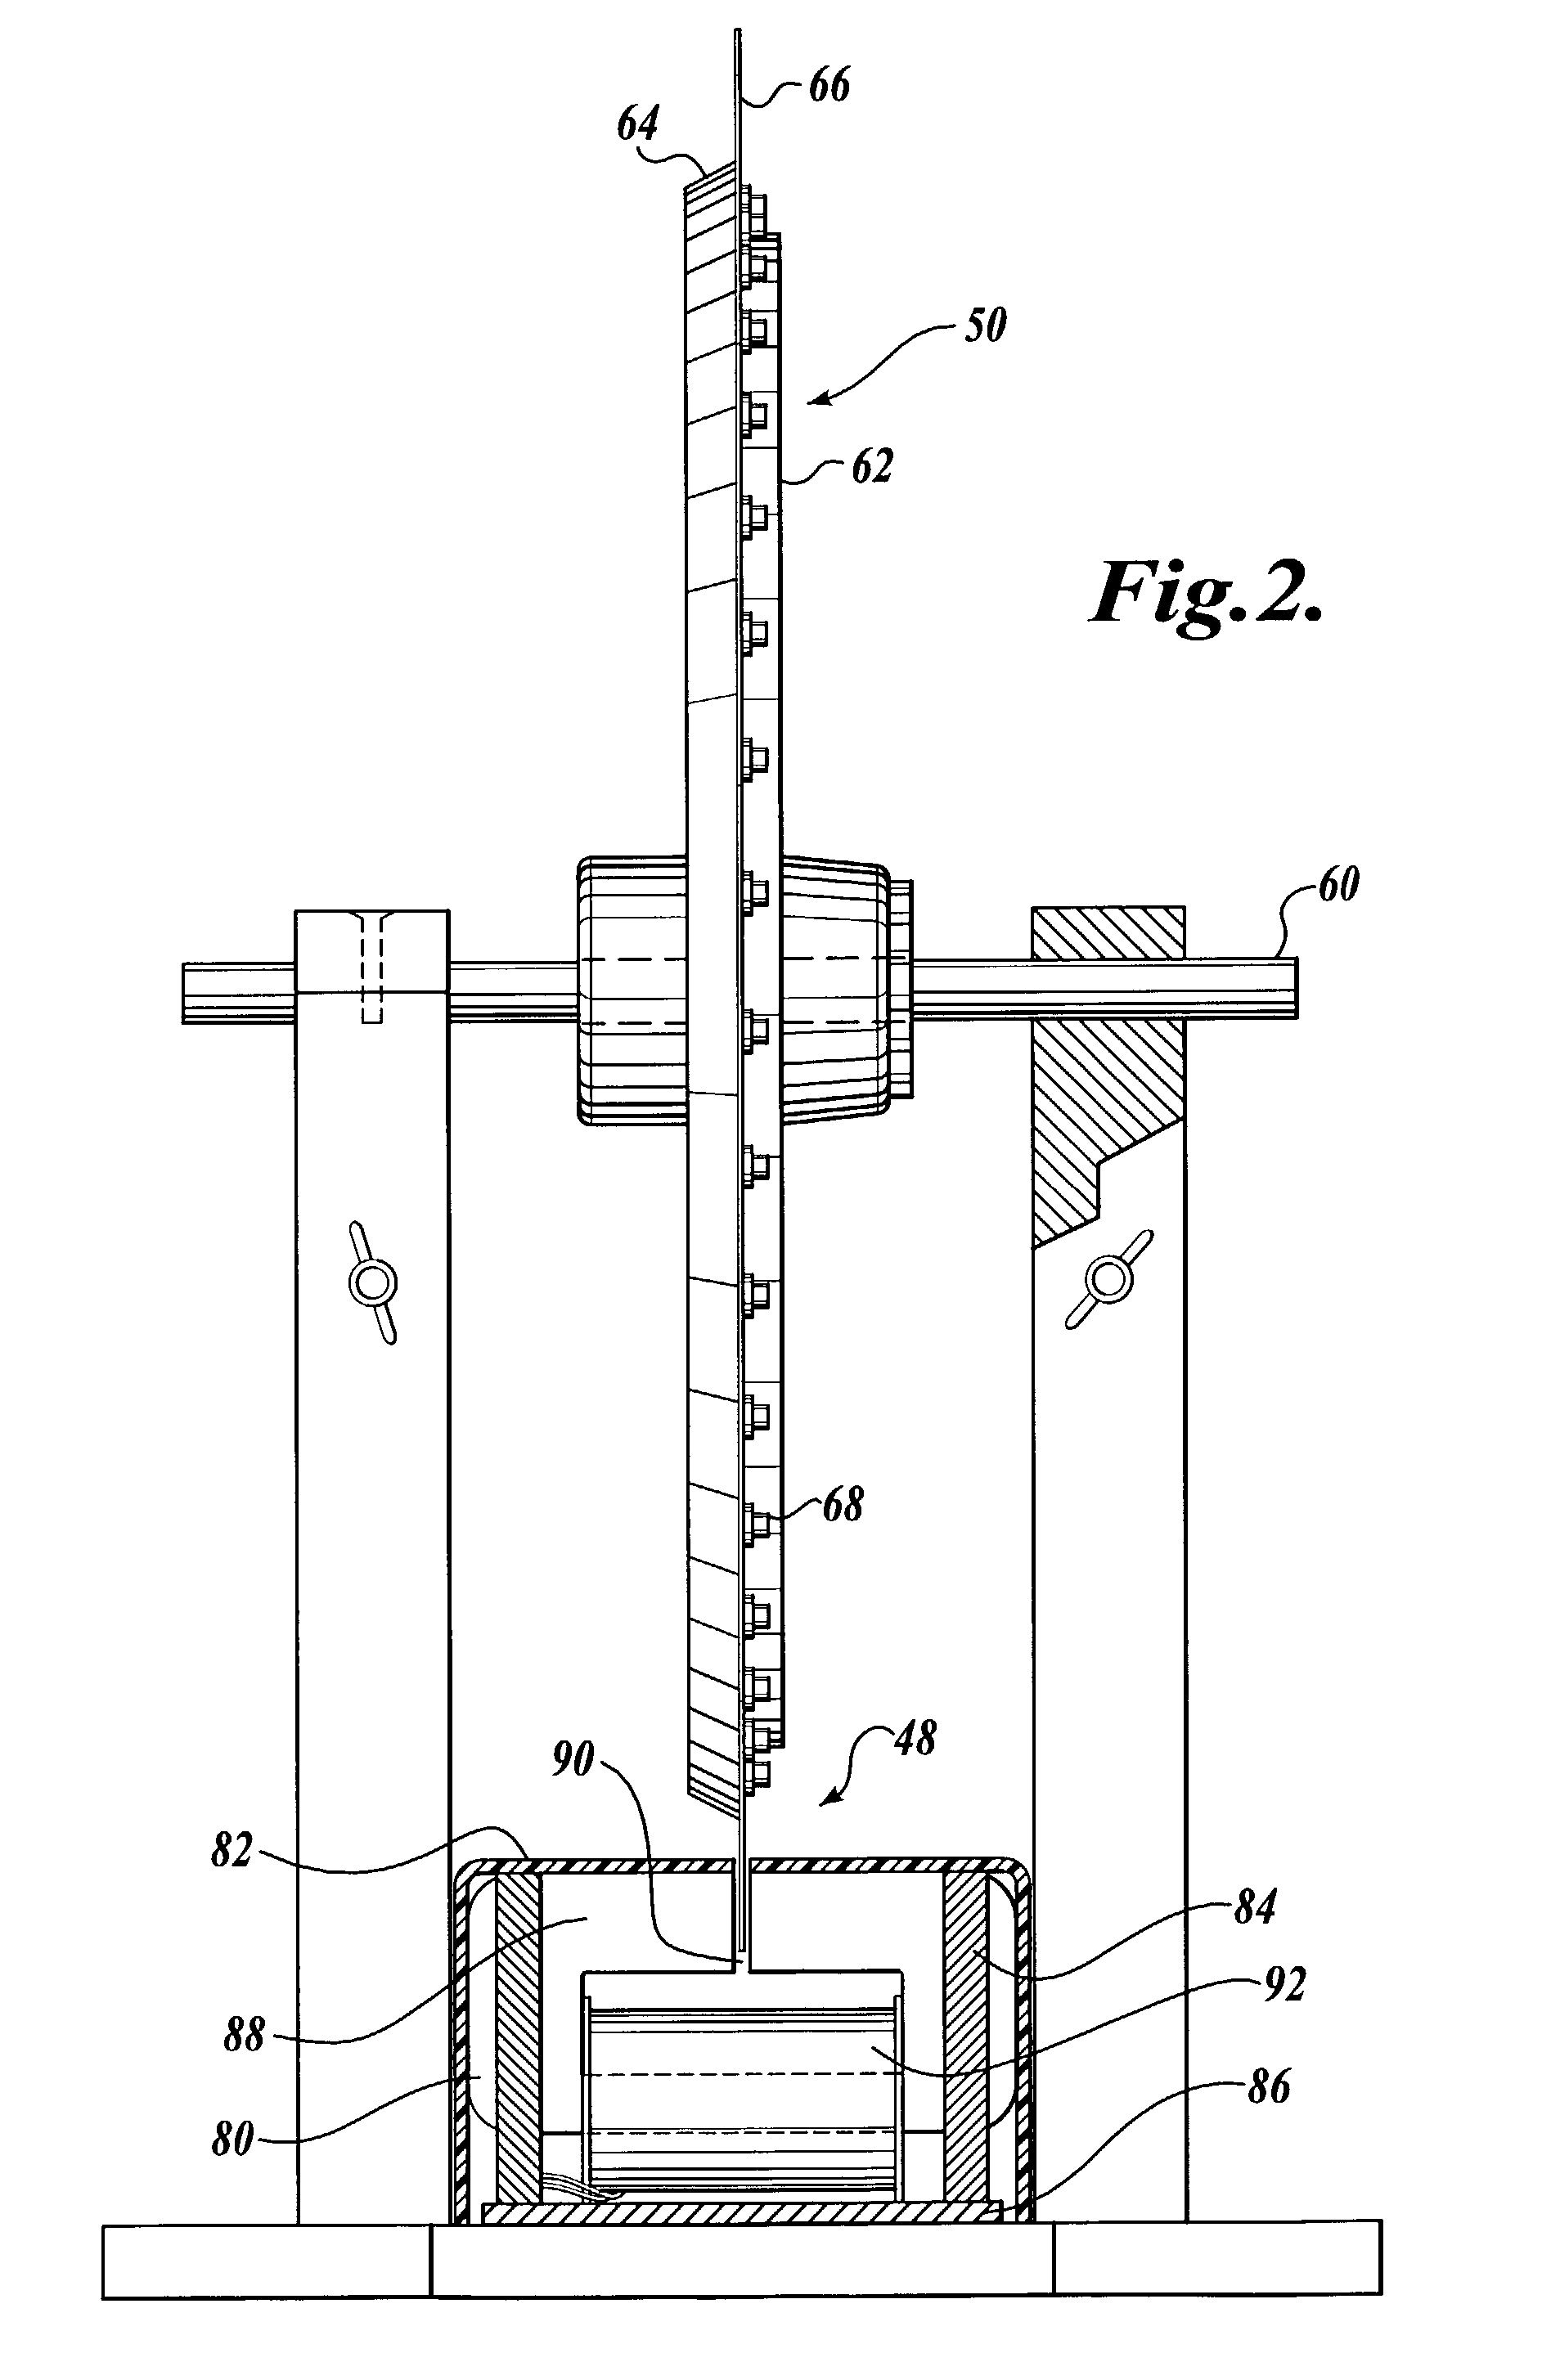 System and method for verifying the calibration of an exercise apparatus